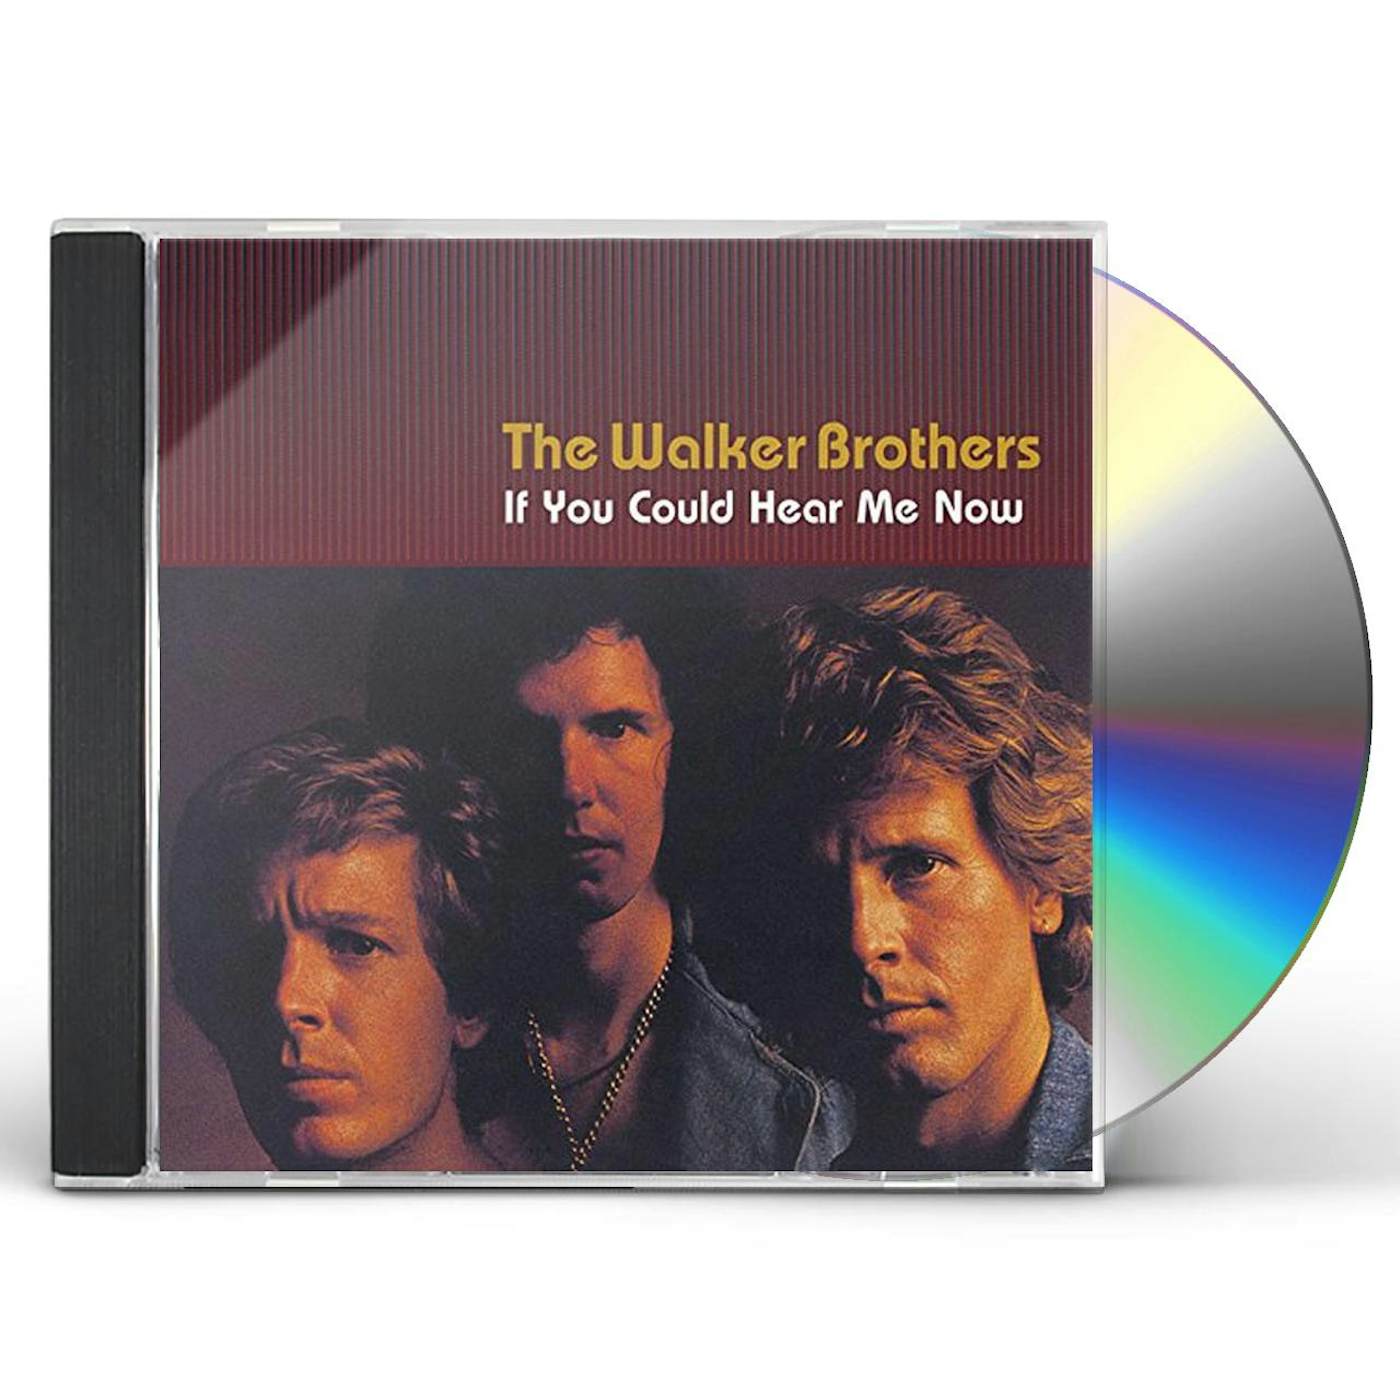 The Walker Brothers IF YOU COULD HEAR ME NOW CD